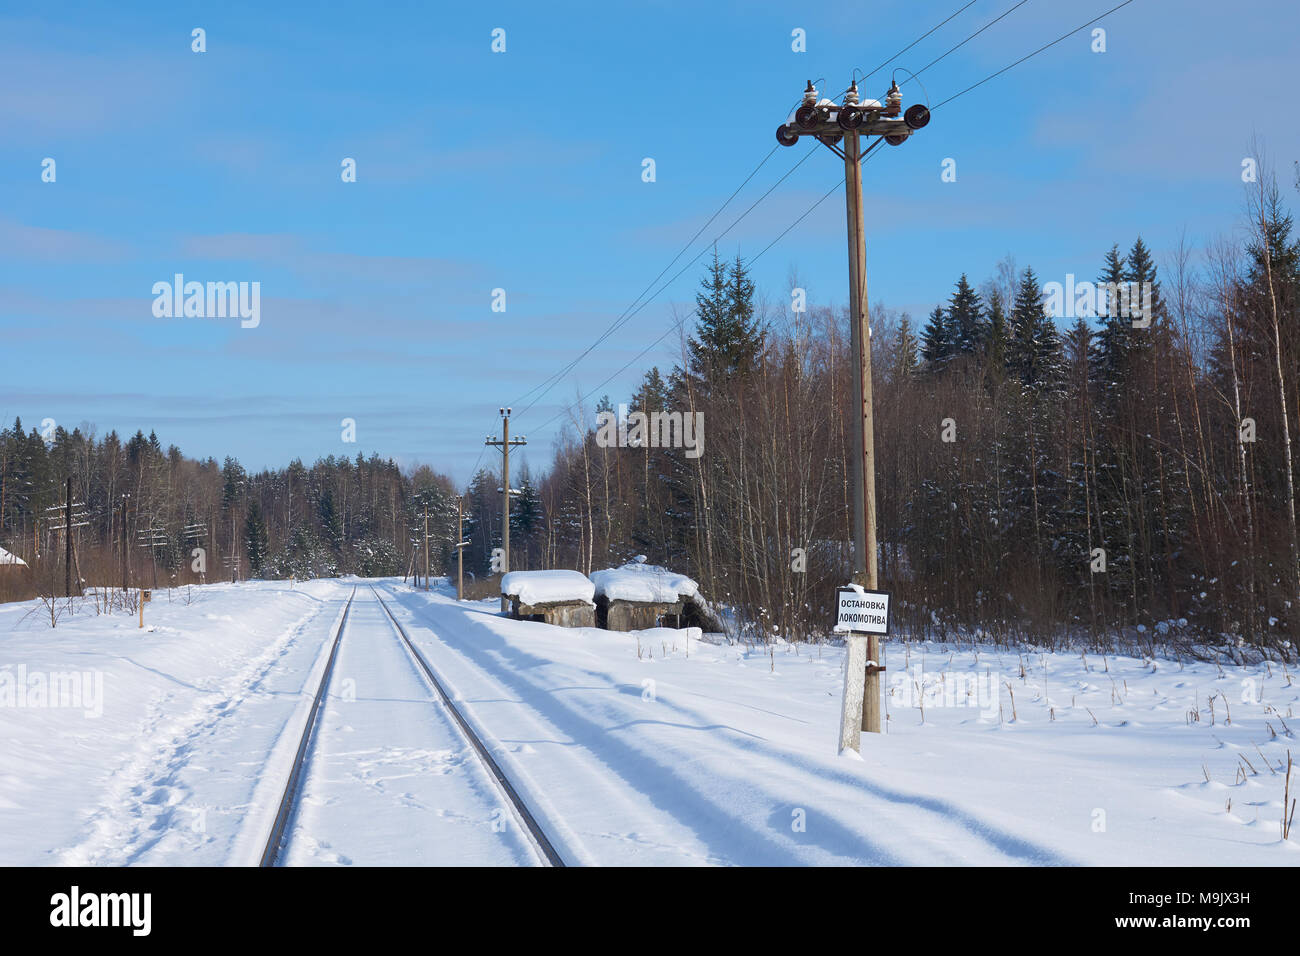 Railway whistle stop in Zhukopa in winter, Peno district, Tver oblast, Russia. Russian text on railway sign on the right: locomotive stop. Stock Photo